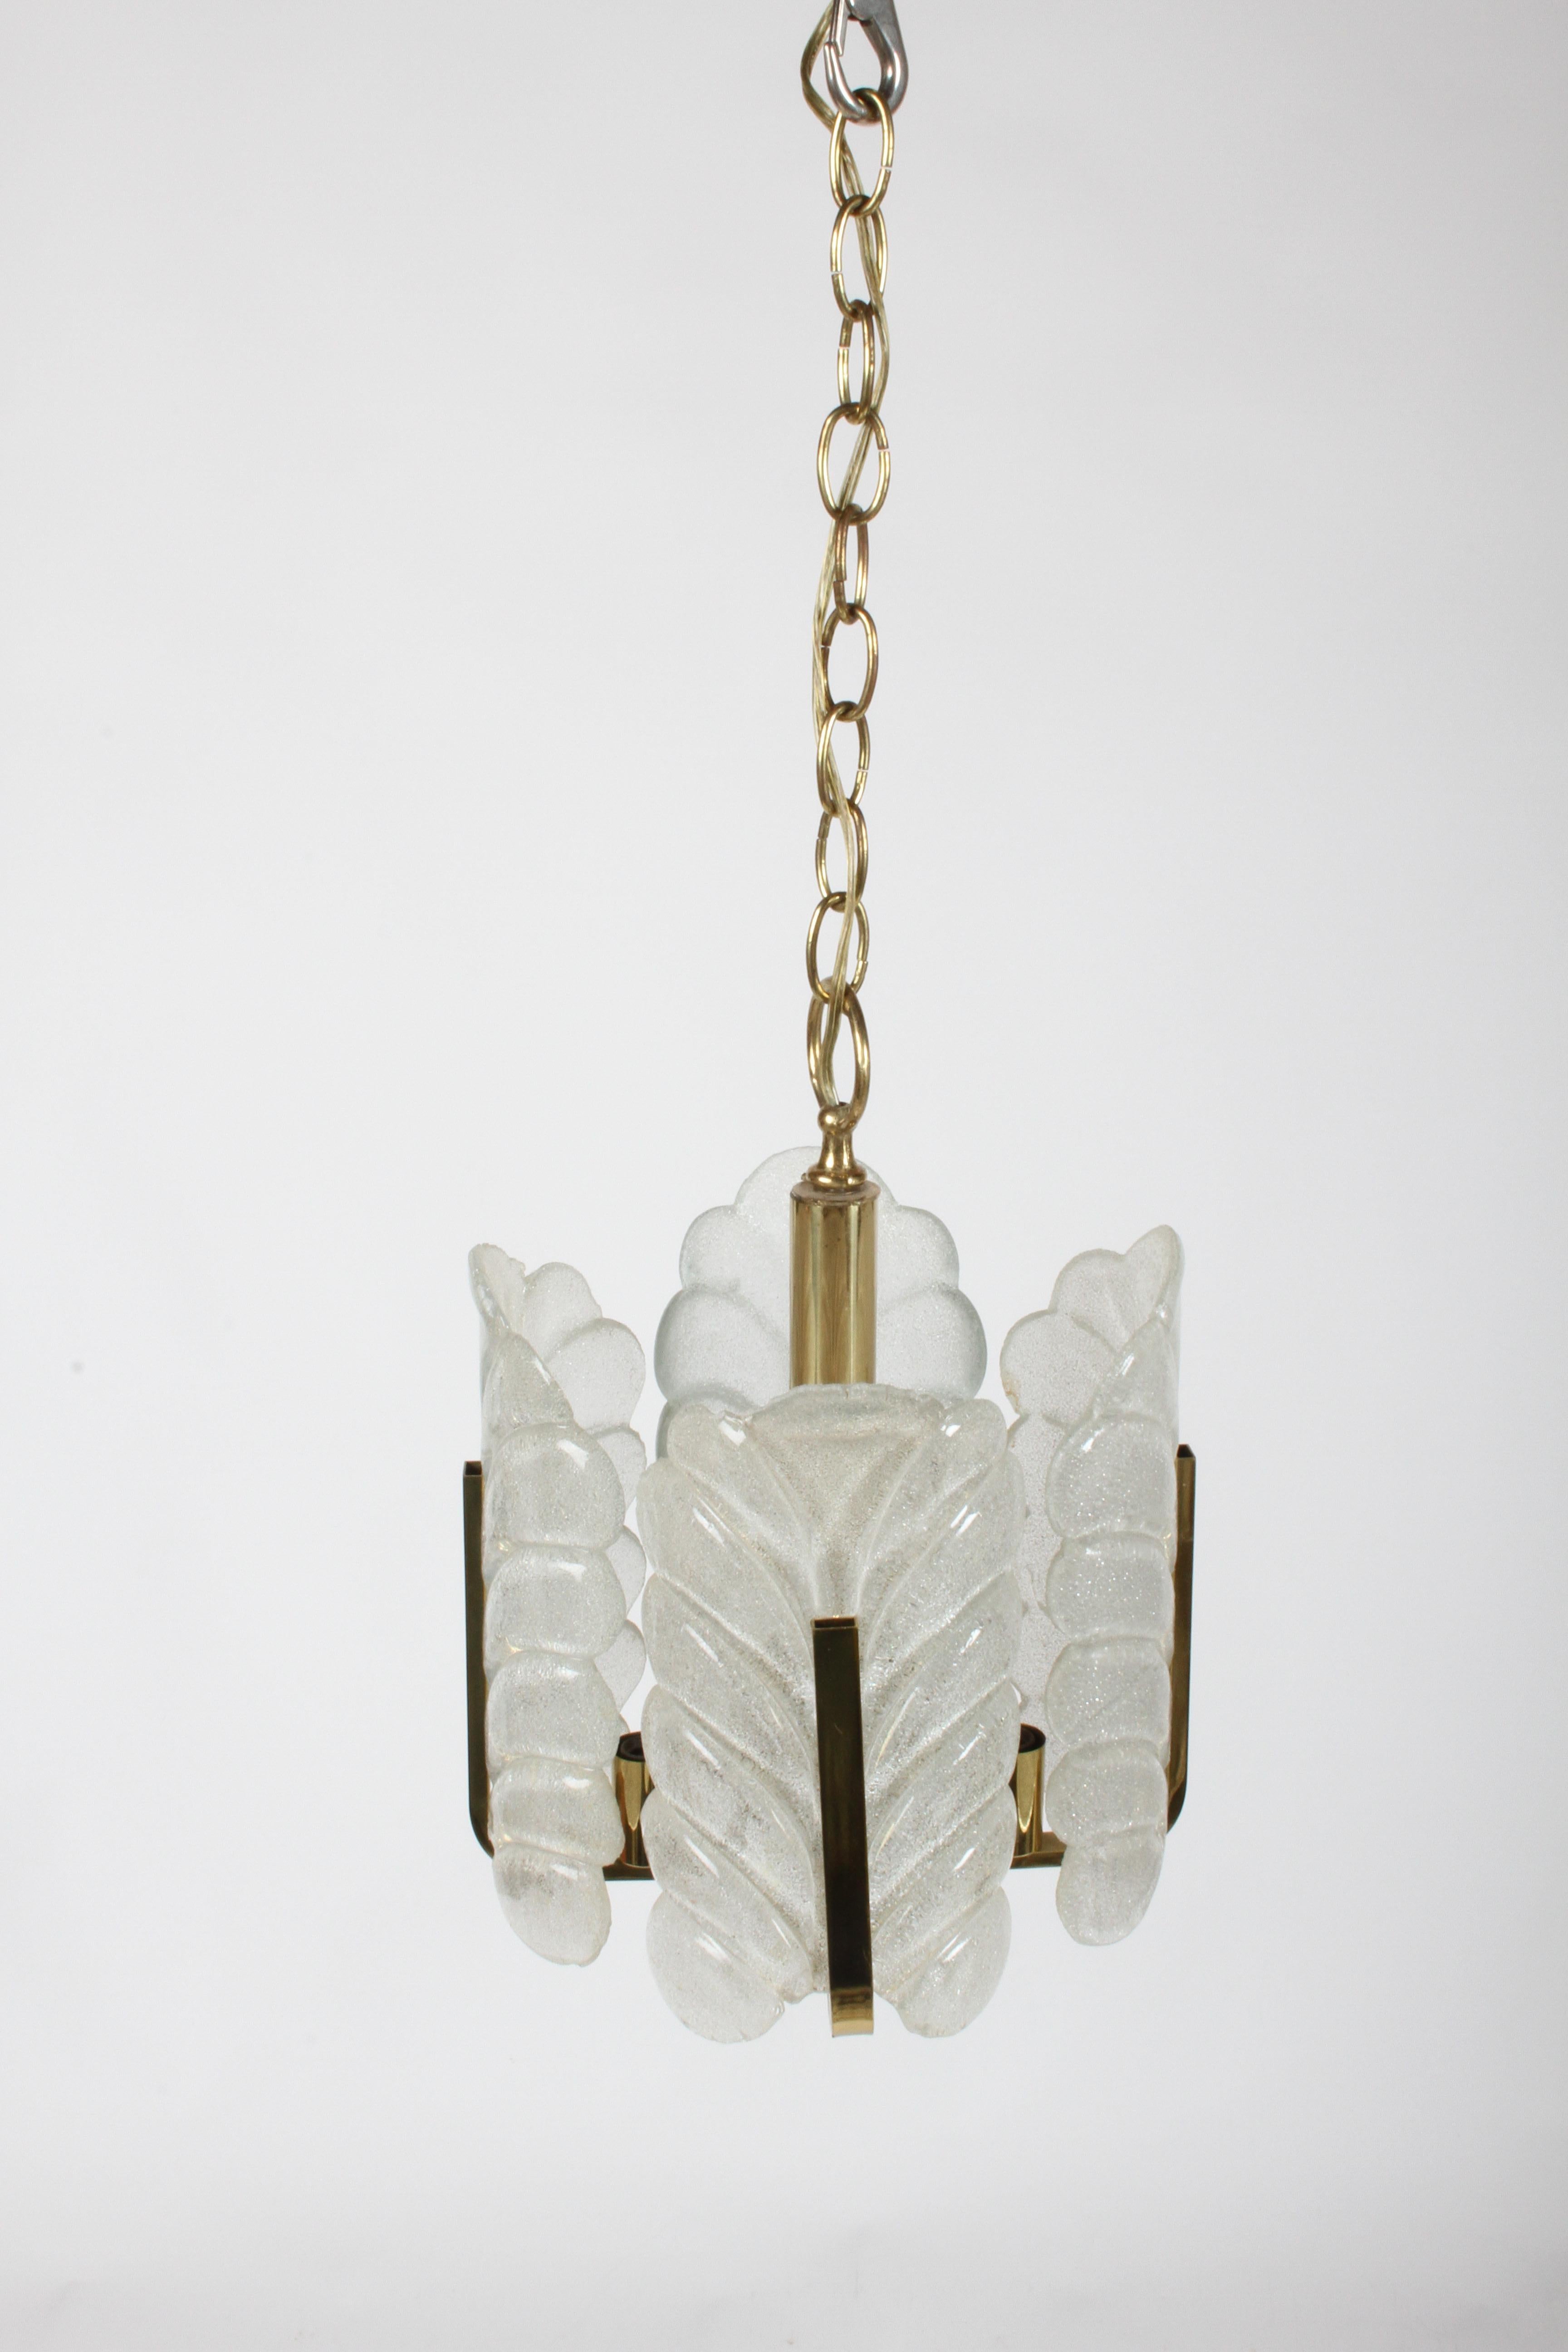 Carl Fagerlund Chandelier for Orrefors Sweden Textured Acanthus Glass Leaves  For Sale 5